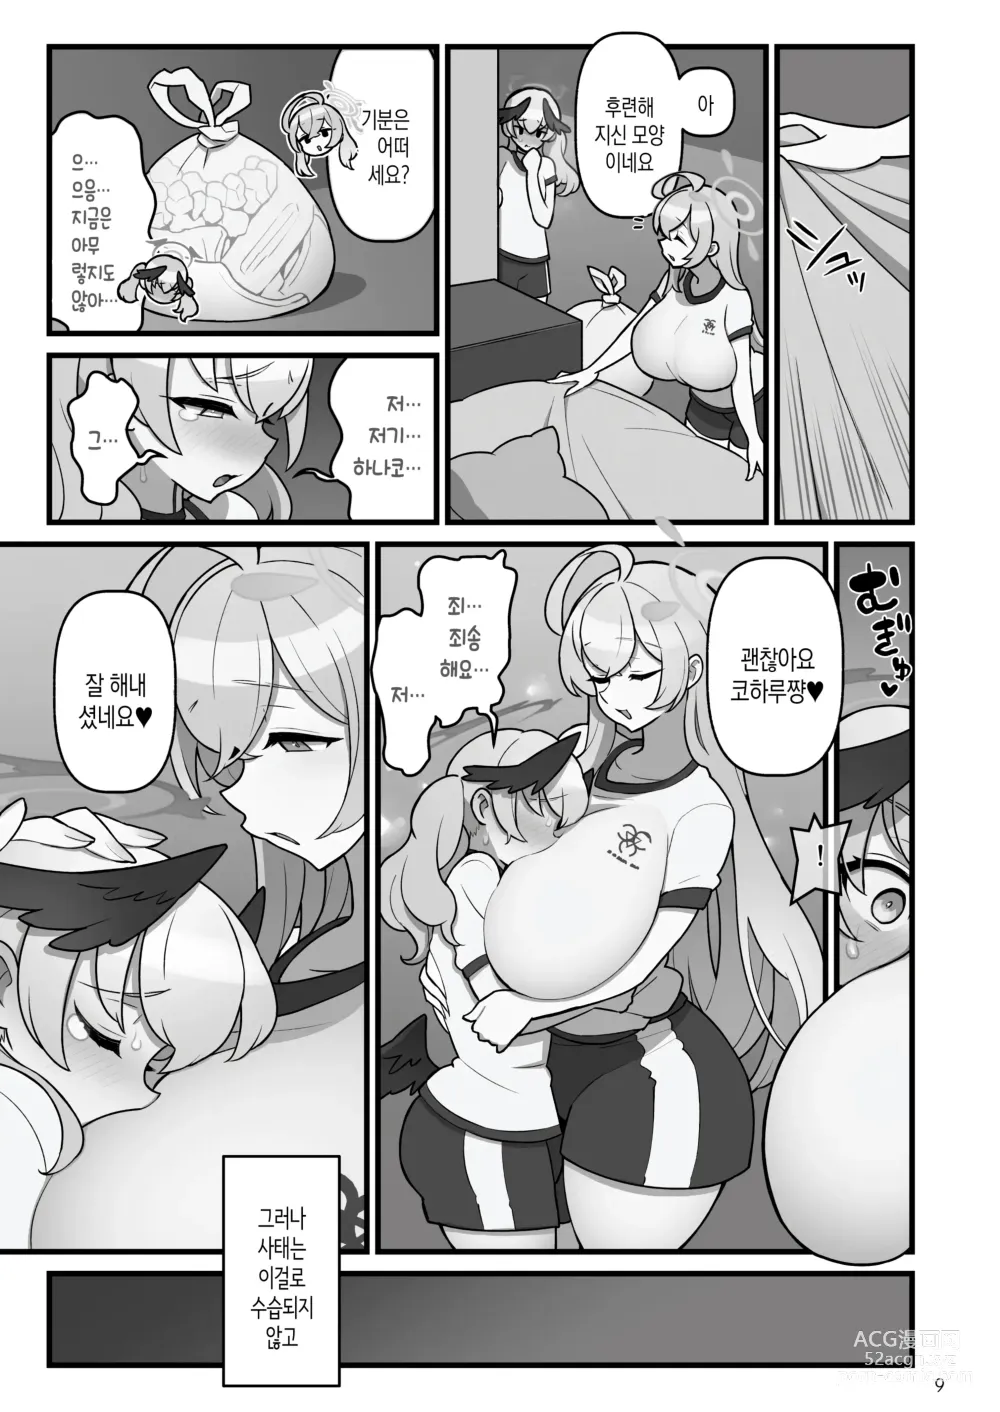 Page 10 of doujinshi 코하루 후타나루